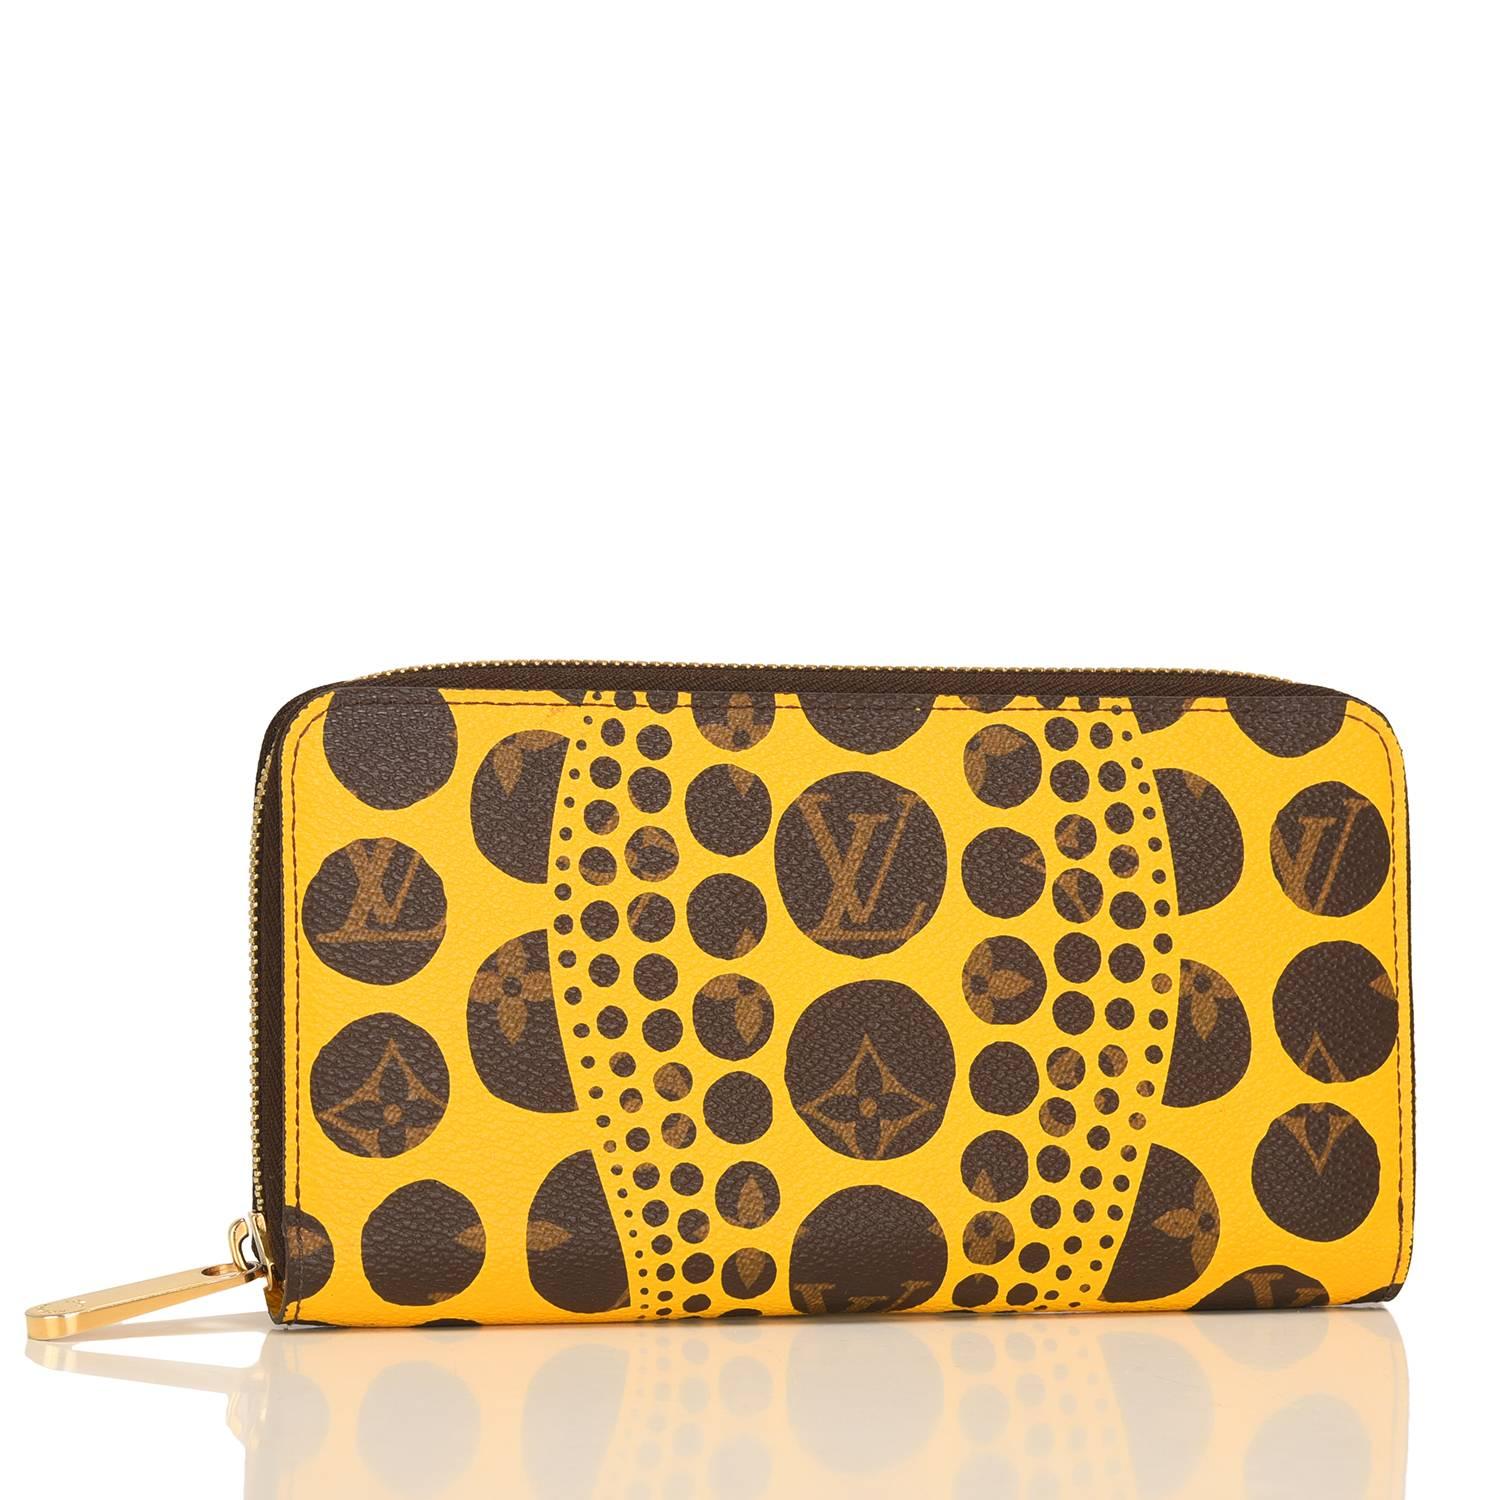 Louis Vuitton Yayoi Kusama Monogram Pumpkin Dots Zippy Wallet of coated canvas and polished brass hardware.

This limited edition wallet has an abstract dots and wave design of yellow silk screened over the classic Monogram design and a 3/4 wrap